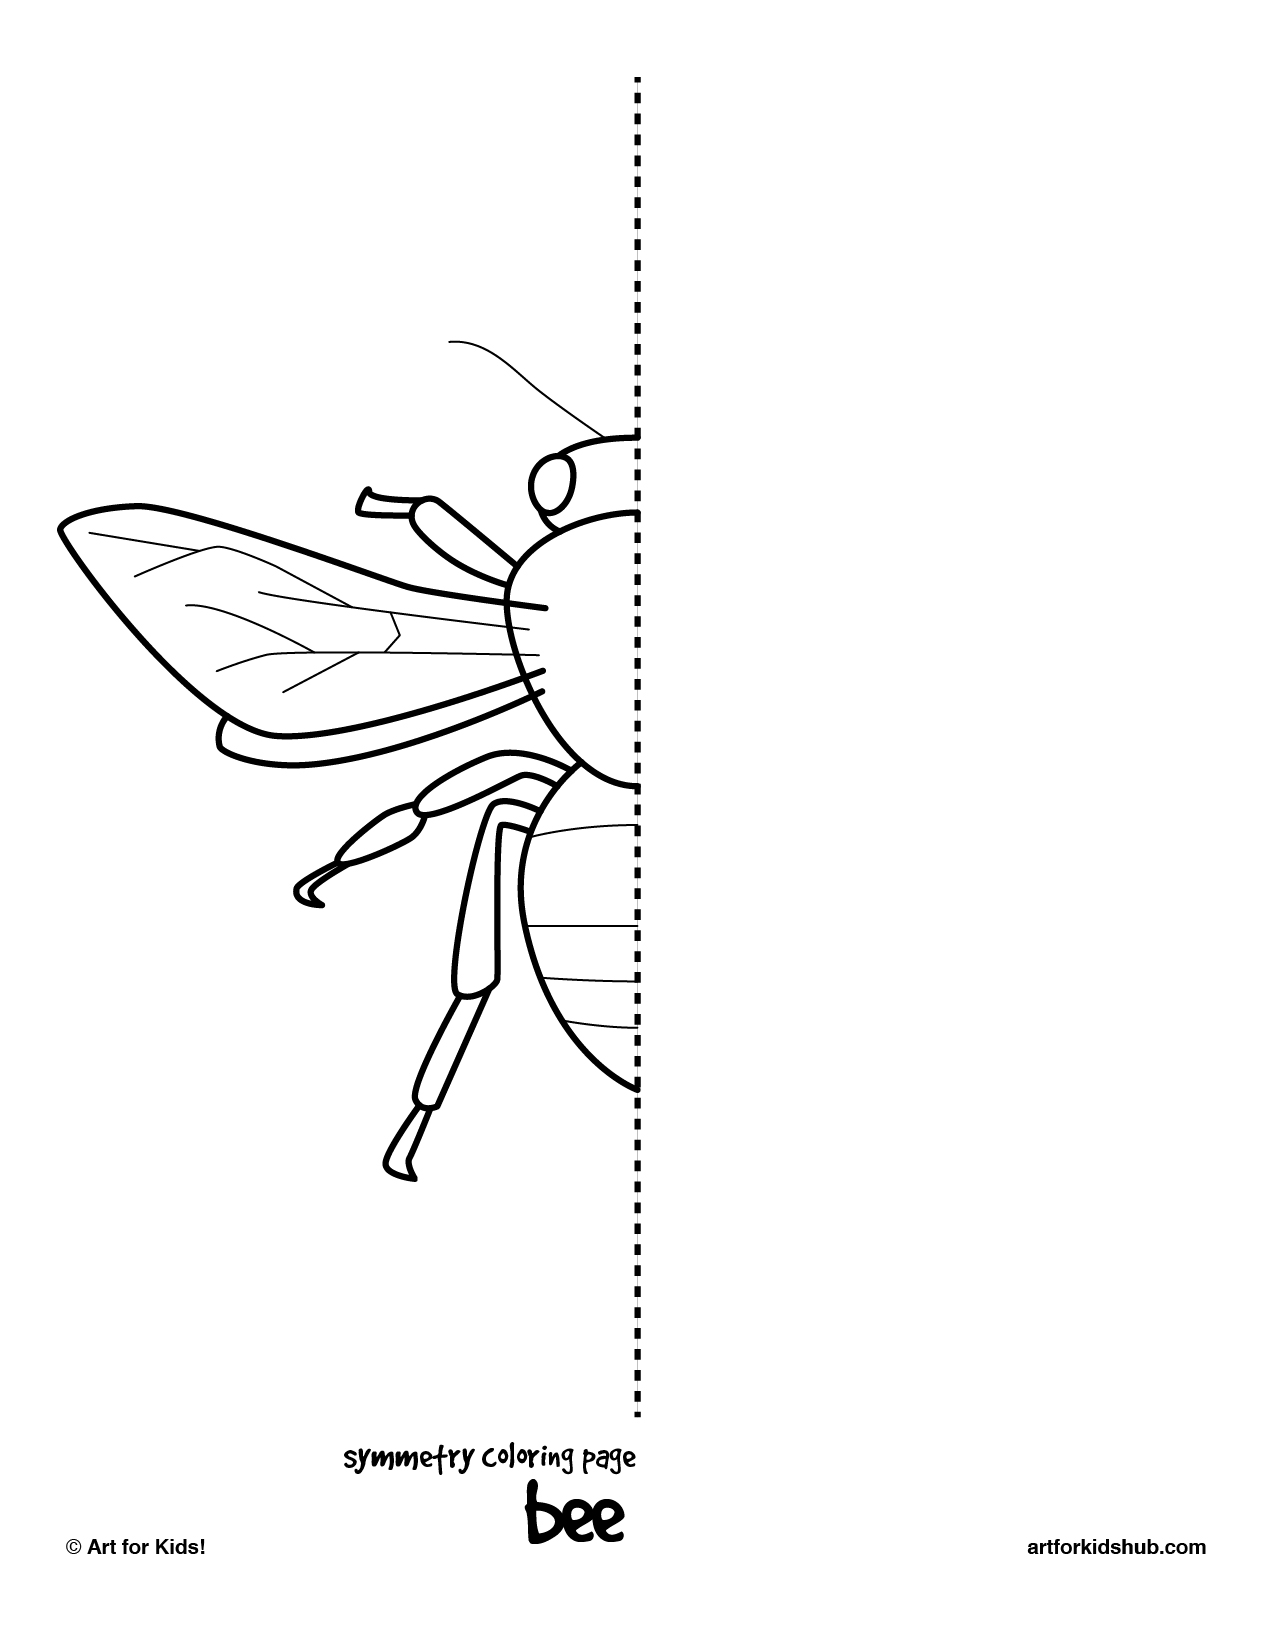 Symmetry Coloring Pages Image